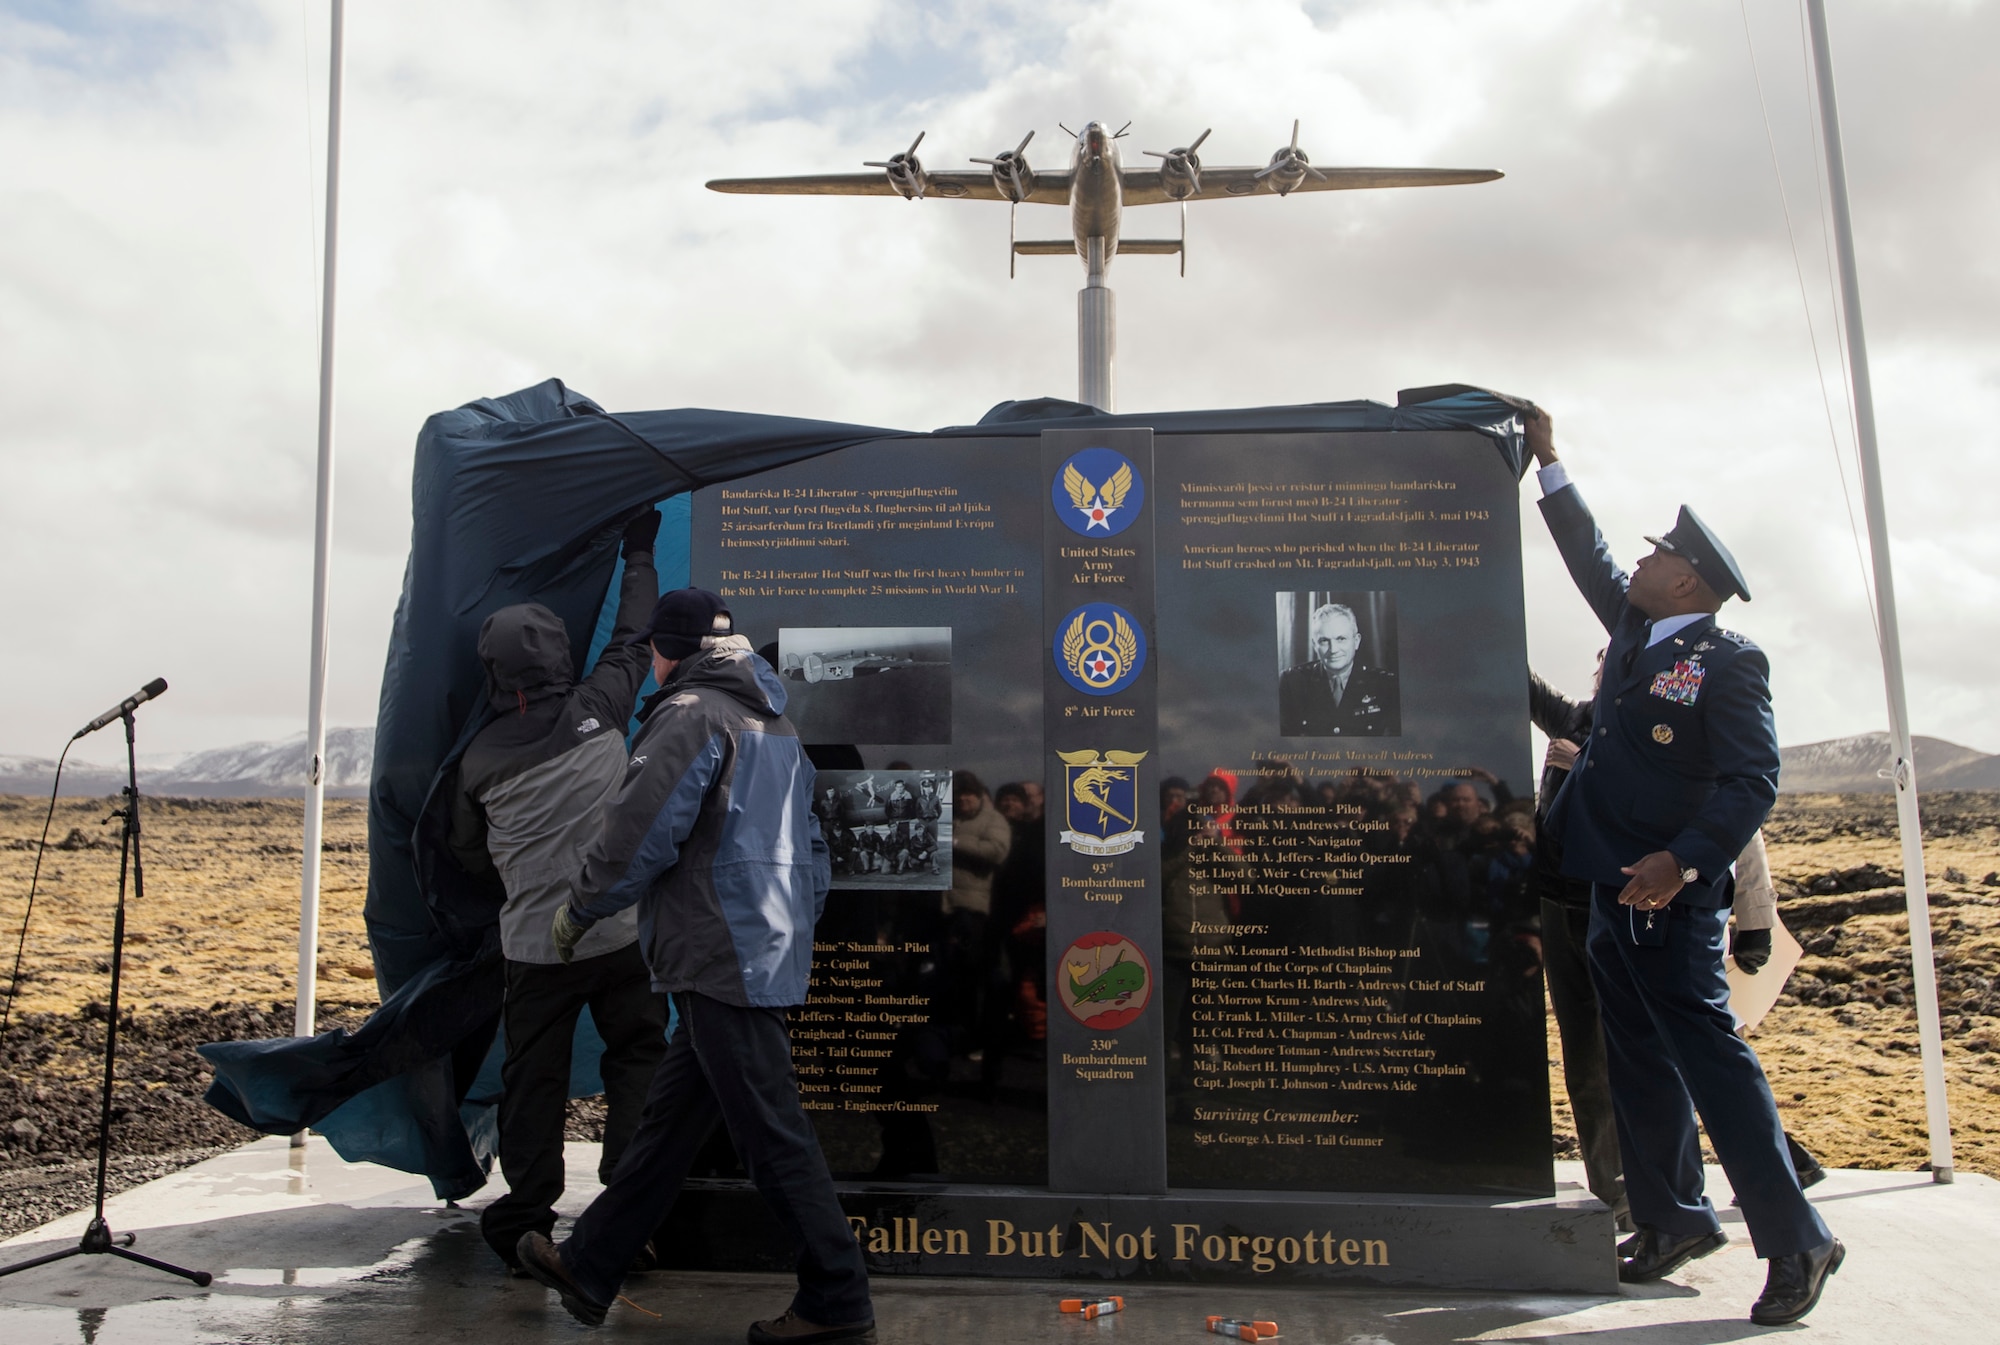 Keflavick, Iceland (May 3, 2018)  U.S. and Iceland honoured the crew of B-52 Liberator ‘Hot Stuff’ monument dedication ceremony on the 75th anniversary of it crashing in Iceland during a heavy storm.  All but one passenger on board were killed to include famous WW II Lt. Gen. Frank Maxwell Andrews.   As two of the founding nations of NATO, Iceland and the U.S. continue their long and enduring relationship of seamless cooperation as allies.  (U.S. Navy photo by MC3 (SW/AW) Evan Parker)